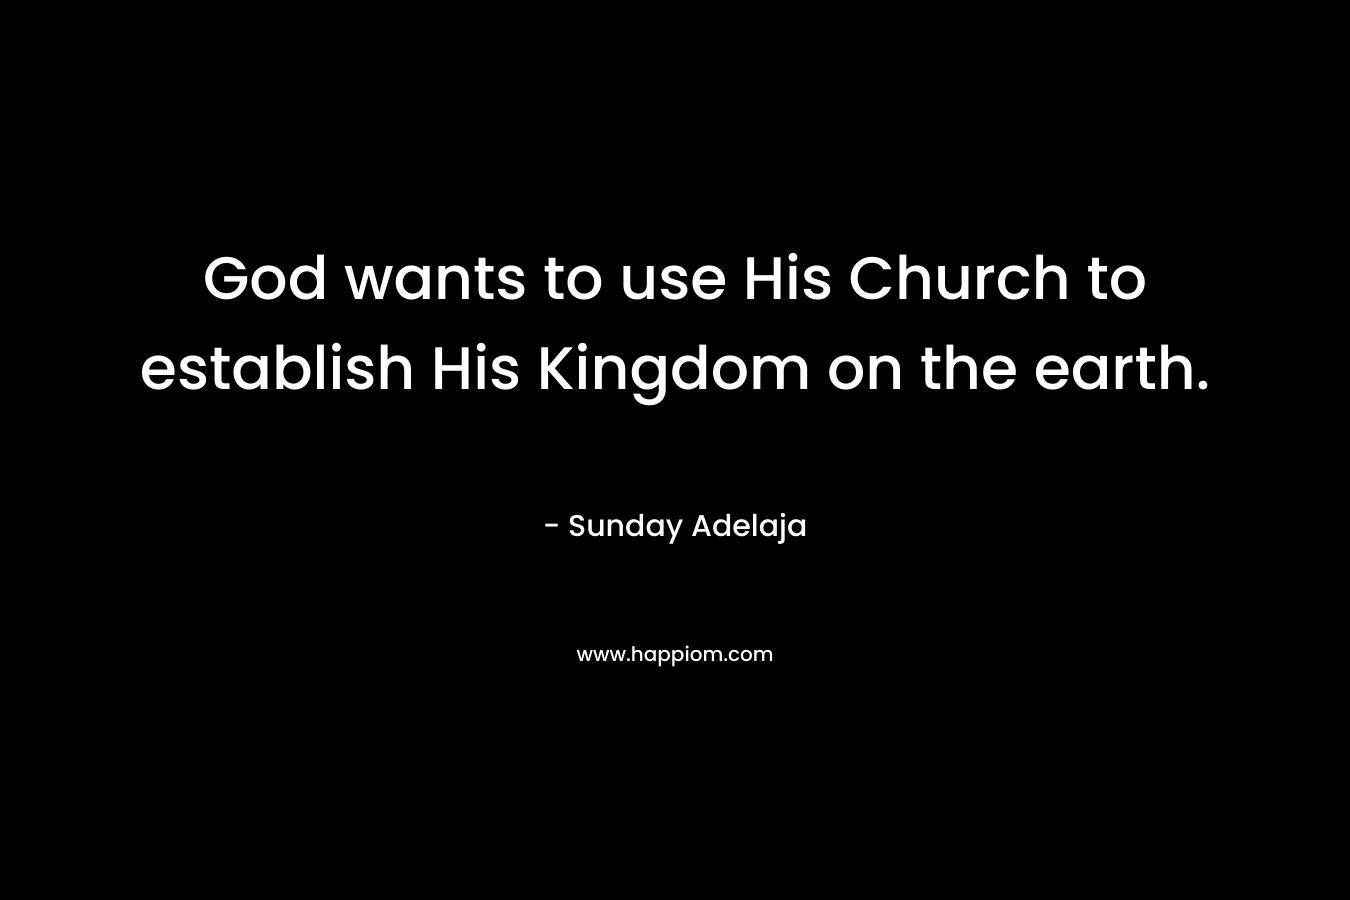 God wants to use His Church to establish His Kingdom on the earth.